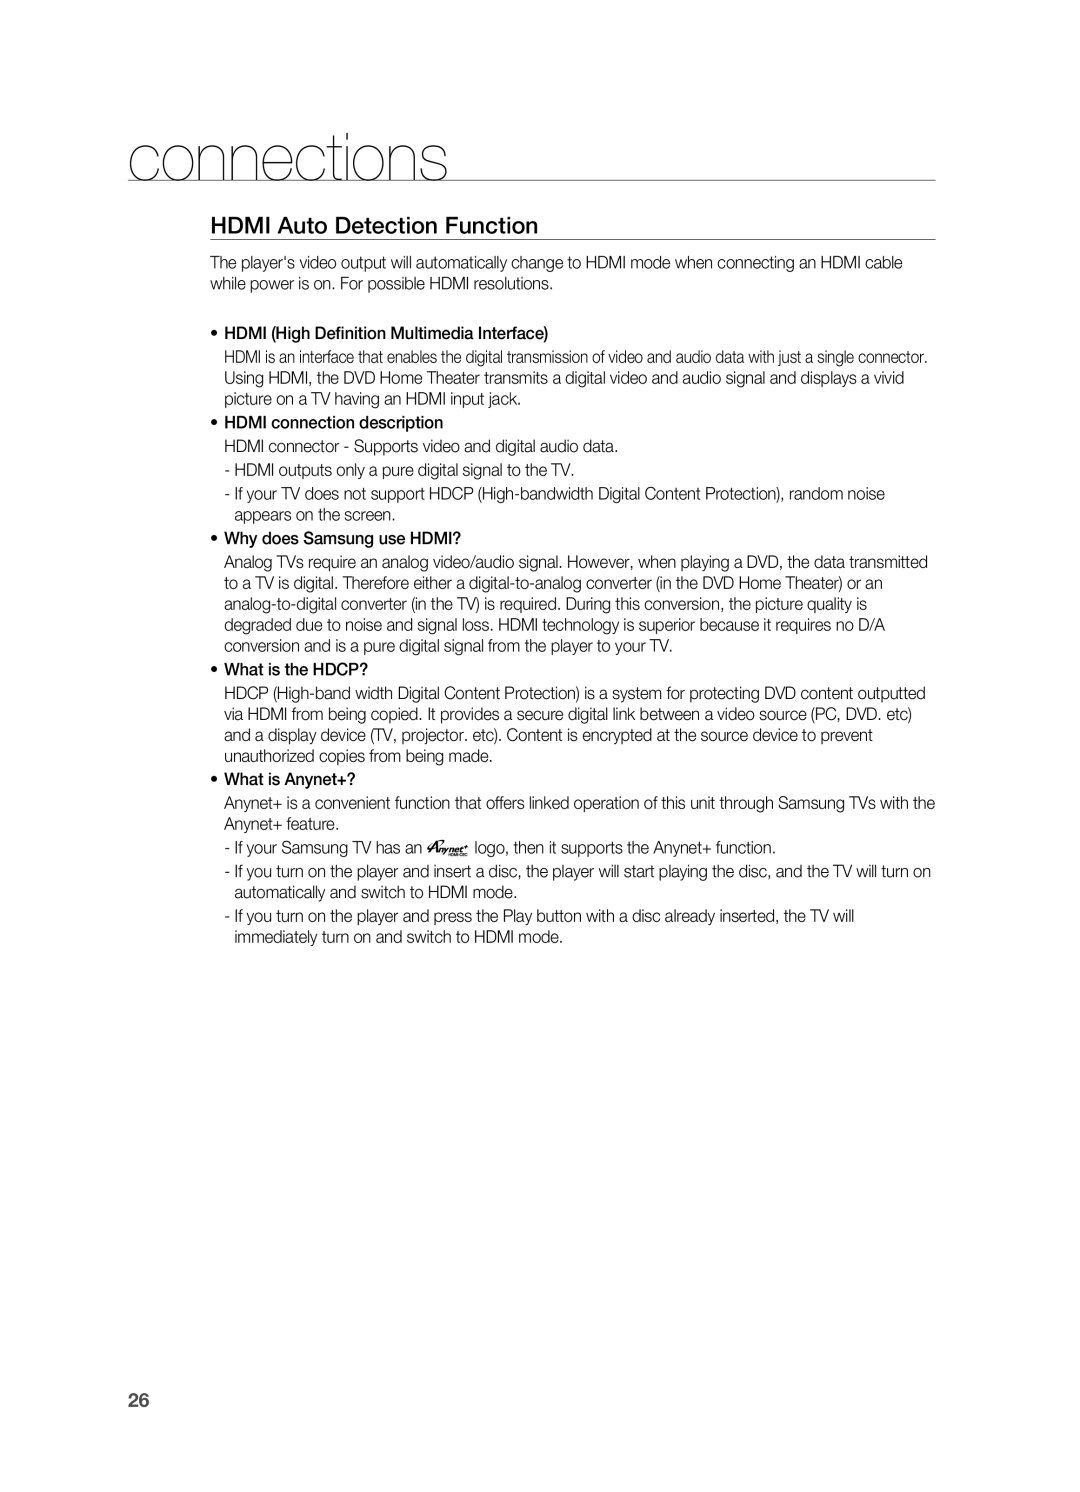 Samsung HT-TZ515 user manual connections, HDMI Auto Detection Function 